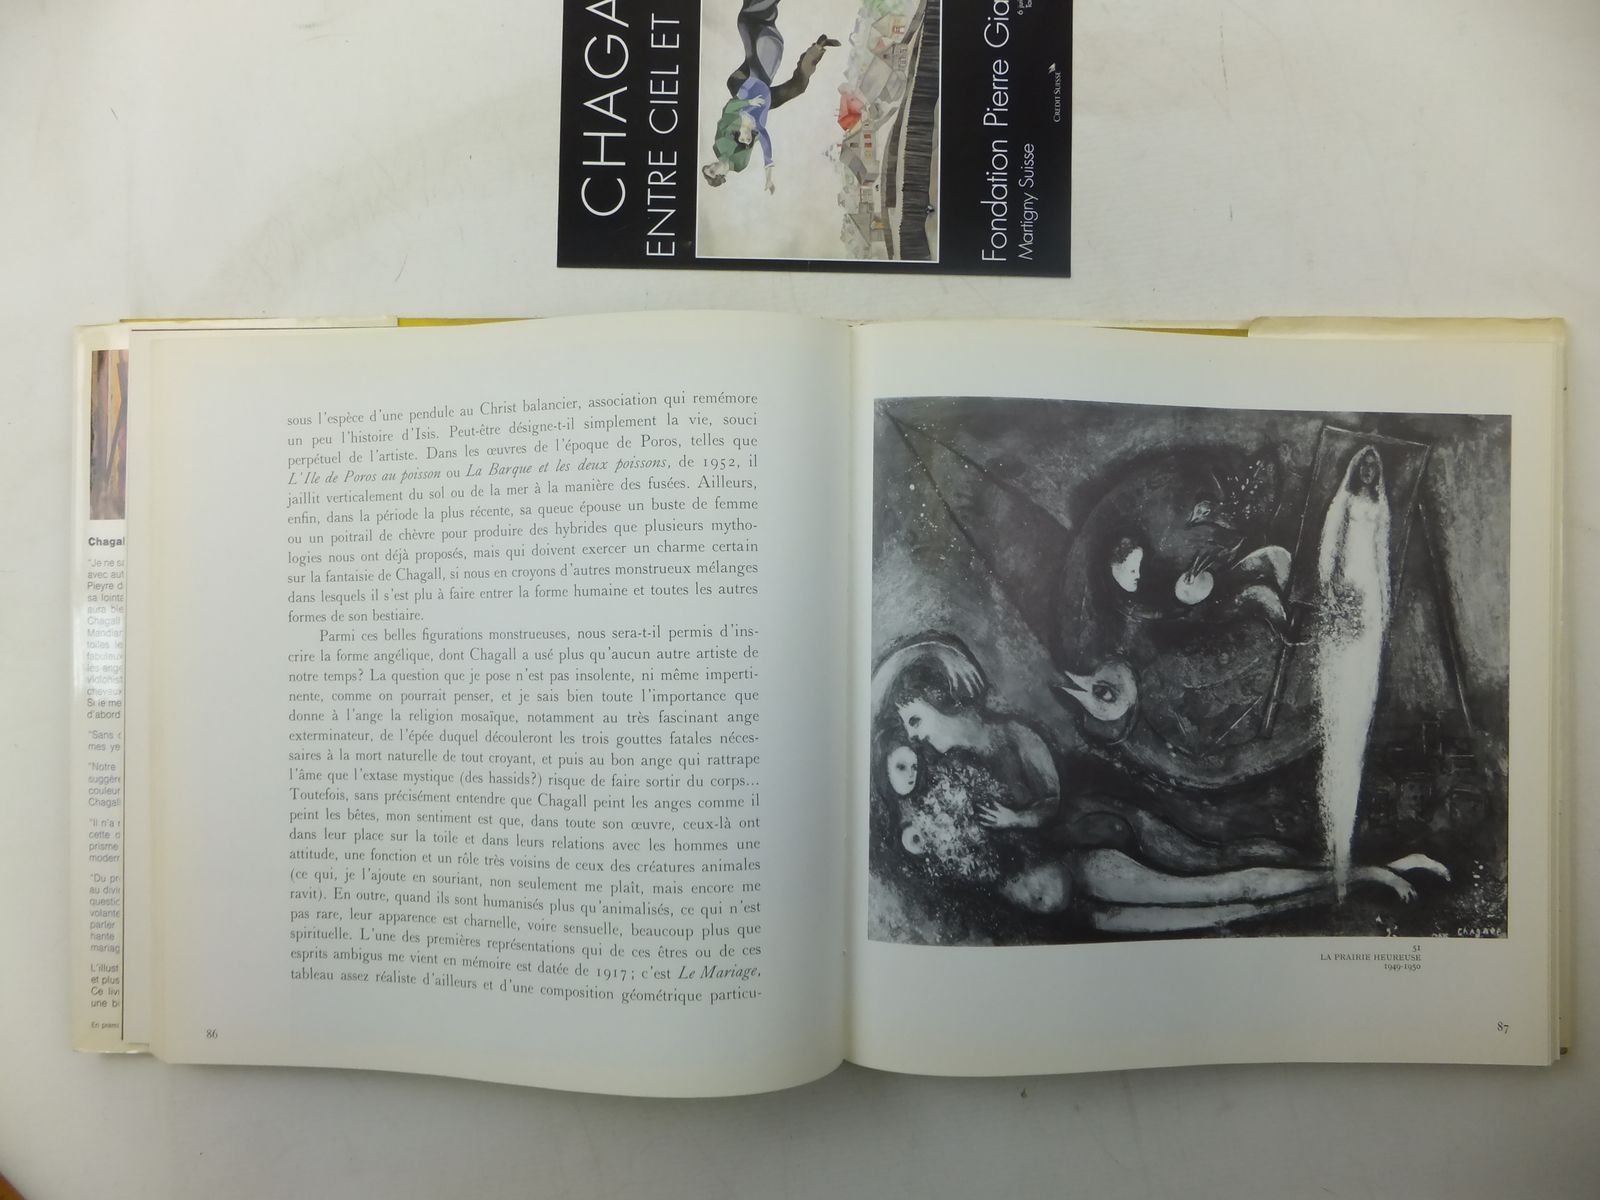 Photo of CHAGALL written by De Mandiargues, Andre Pieyre illustrated by Chagall, Marc published by Maeght Editeur (STOCK CODE: 2117335)  for sale by Stella & Rose's Books